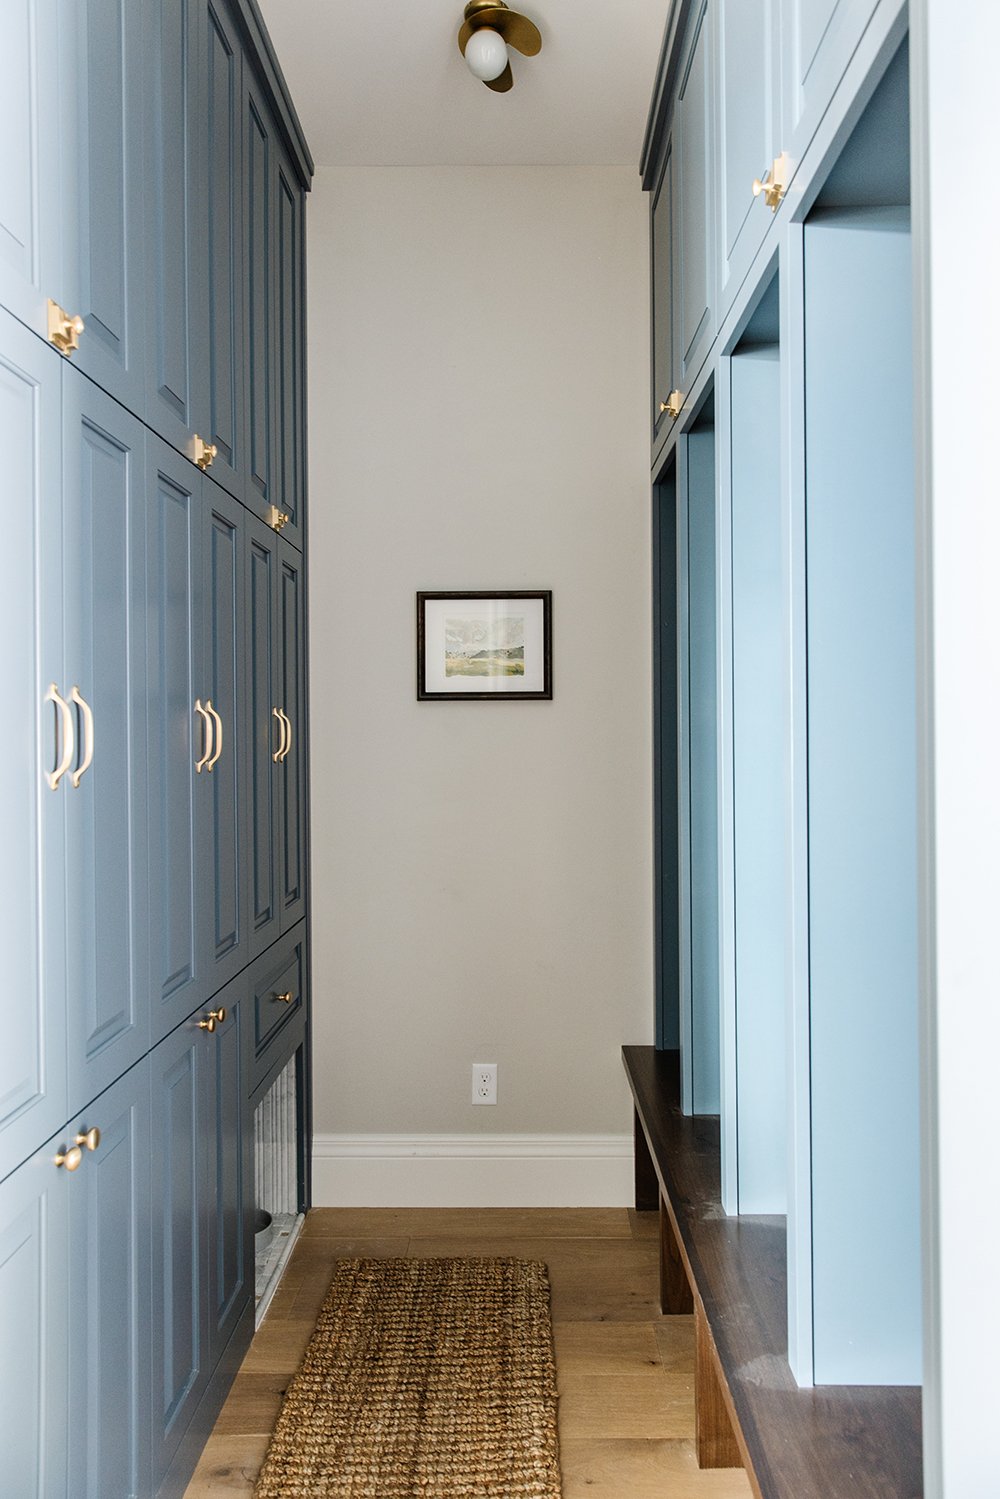  Small mudrooms can still be fully functional like this one designed by Liz Powell. The bright blue color adds personality to this room. Blue mudroom lockers small mudroom personal lockers #mudroomlockers #bluemudroom #blueanddarkwalnut #goldhardware